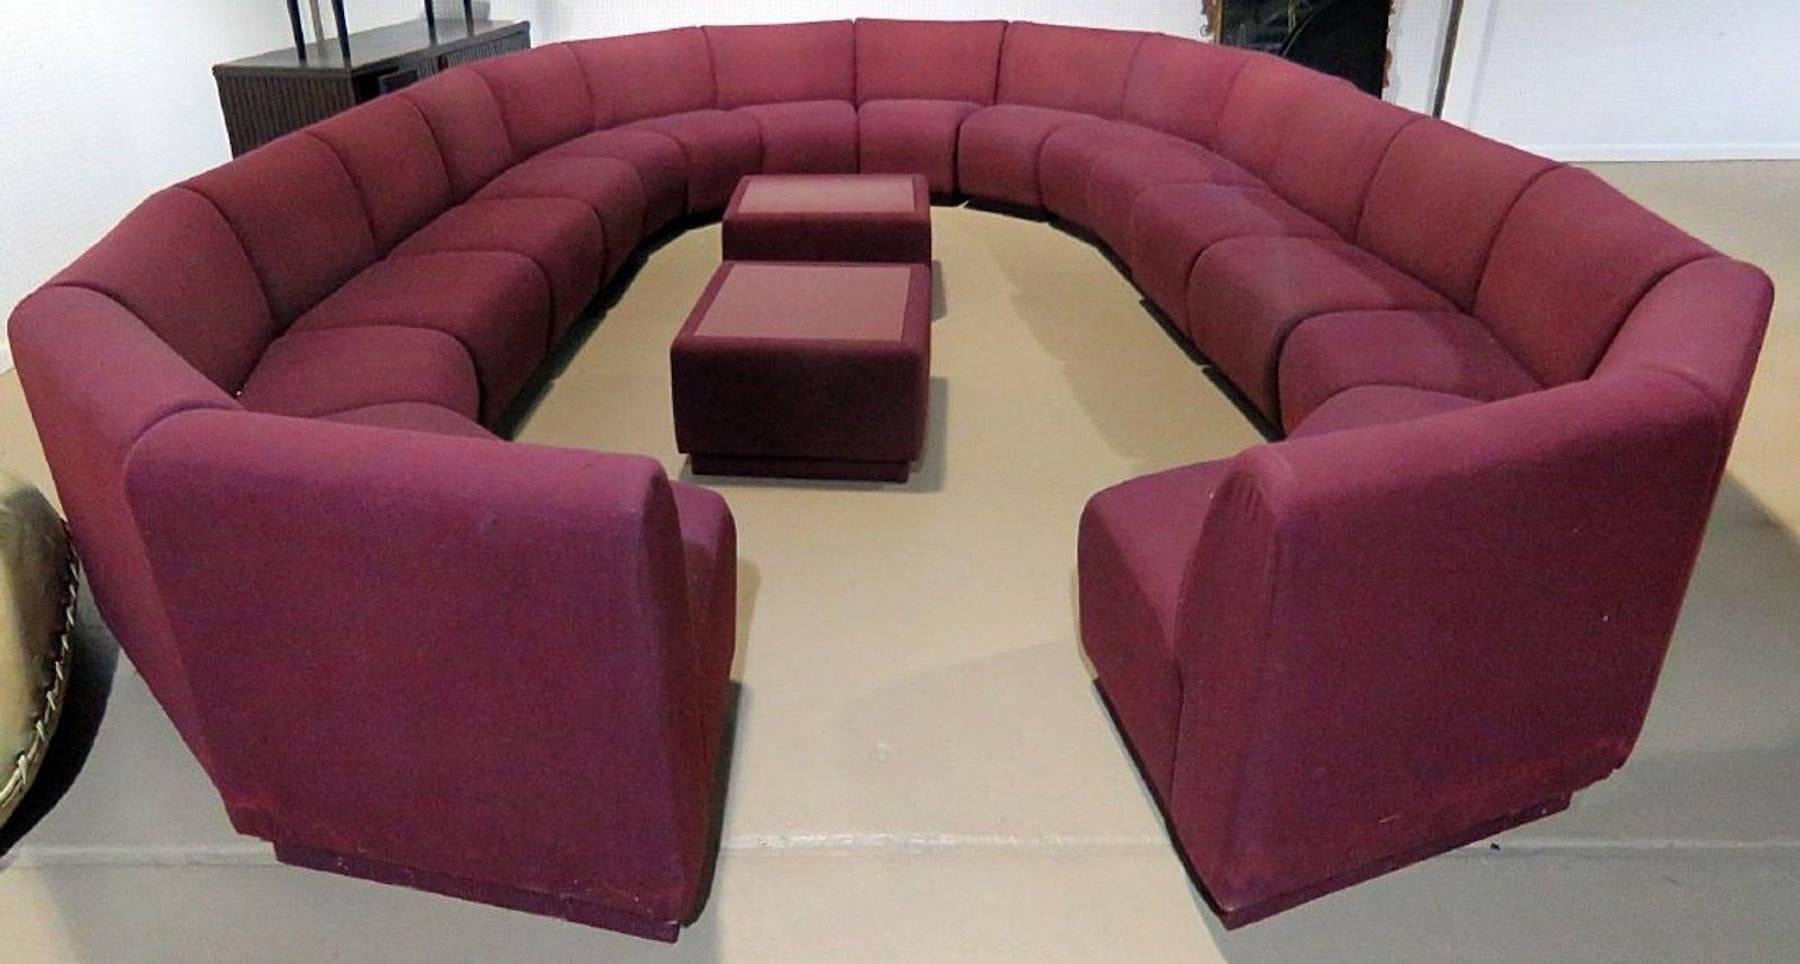 Milo Baughman for Thayer Coggin 20 piece modular living room set. Numerous seating arrangements possible, Consisting 18 modular 'curved' upholstered pieces and two ottomans
Twelve Larger Curved Modular Seats 30 1/4